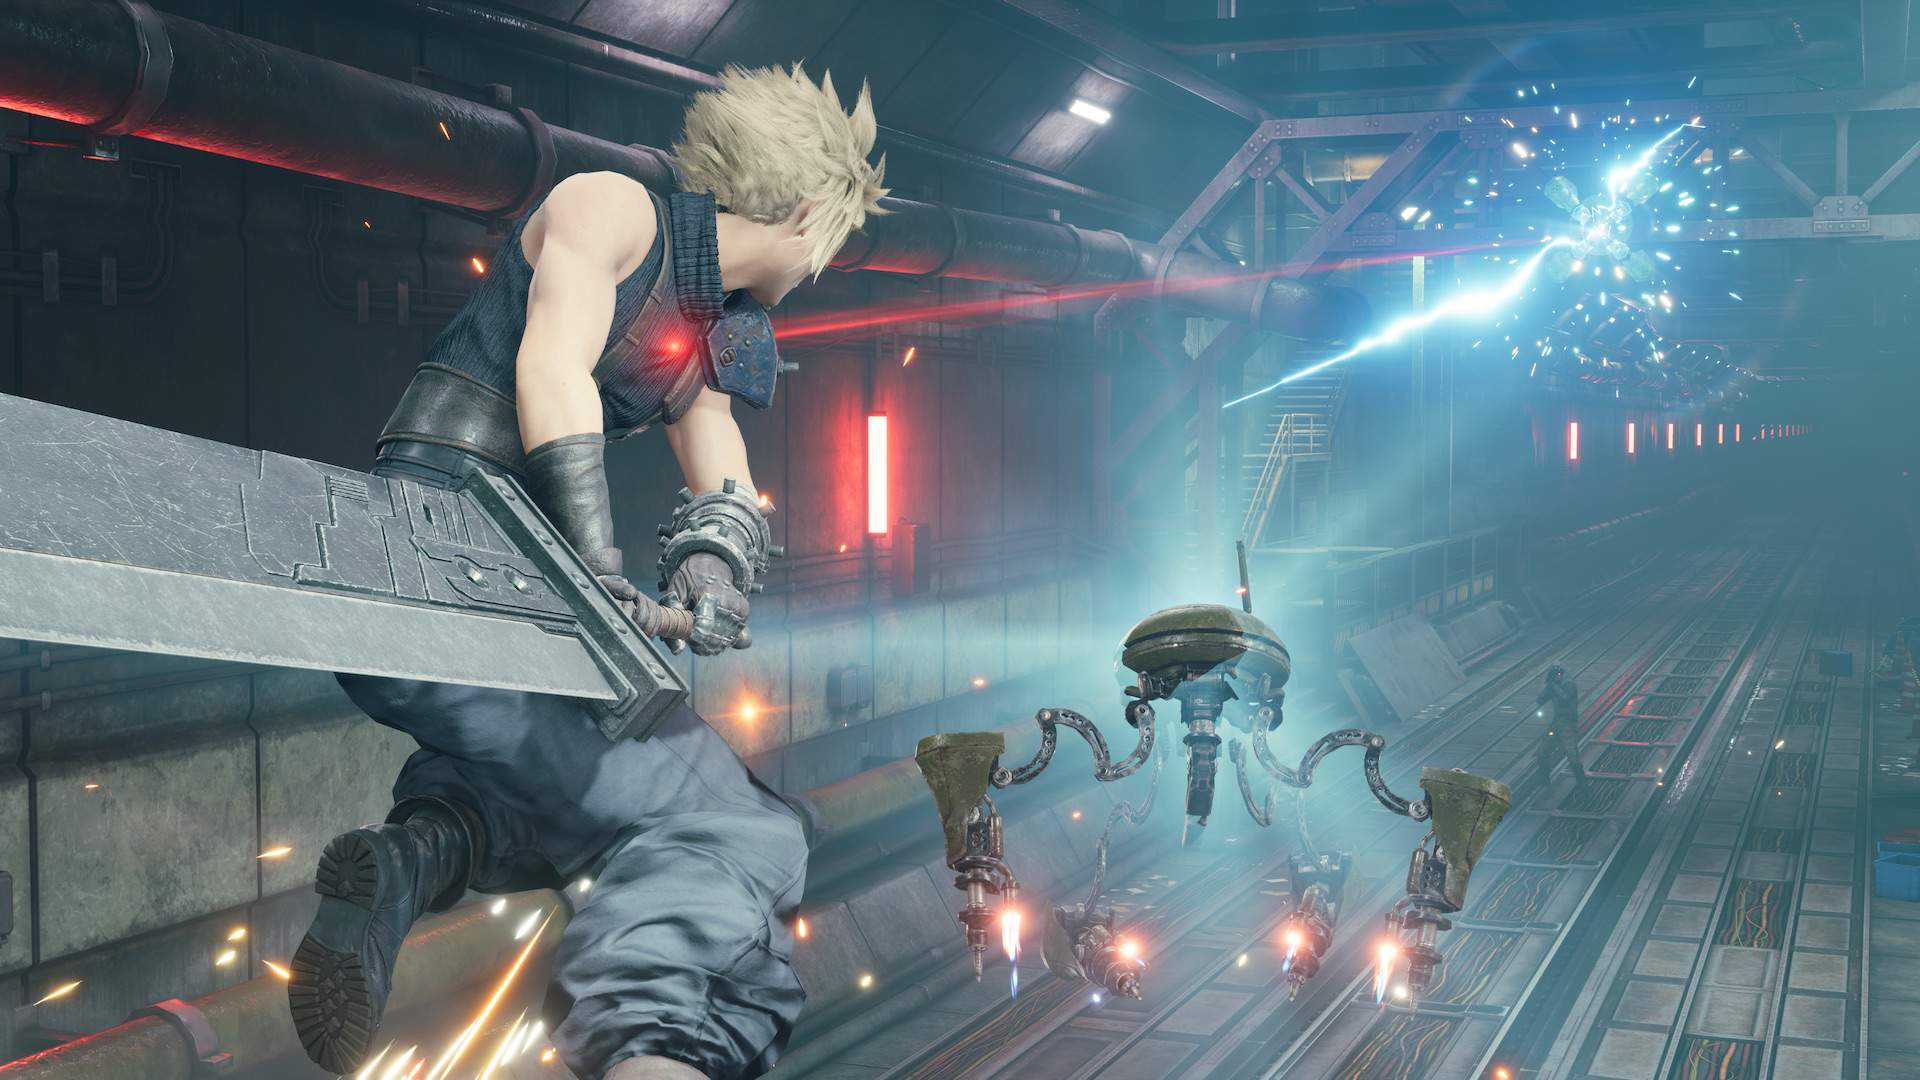 FINAL FANTASY VII REMAKE INTERGRADE | Download and Buy Today - Epic Games  Store